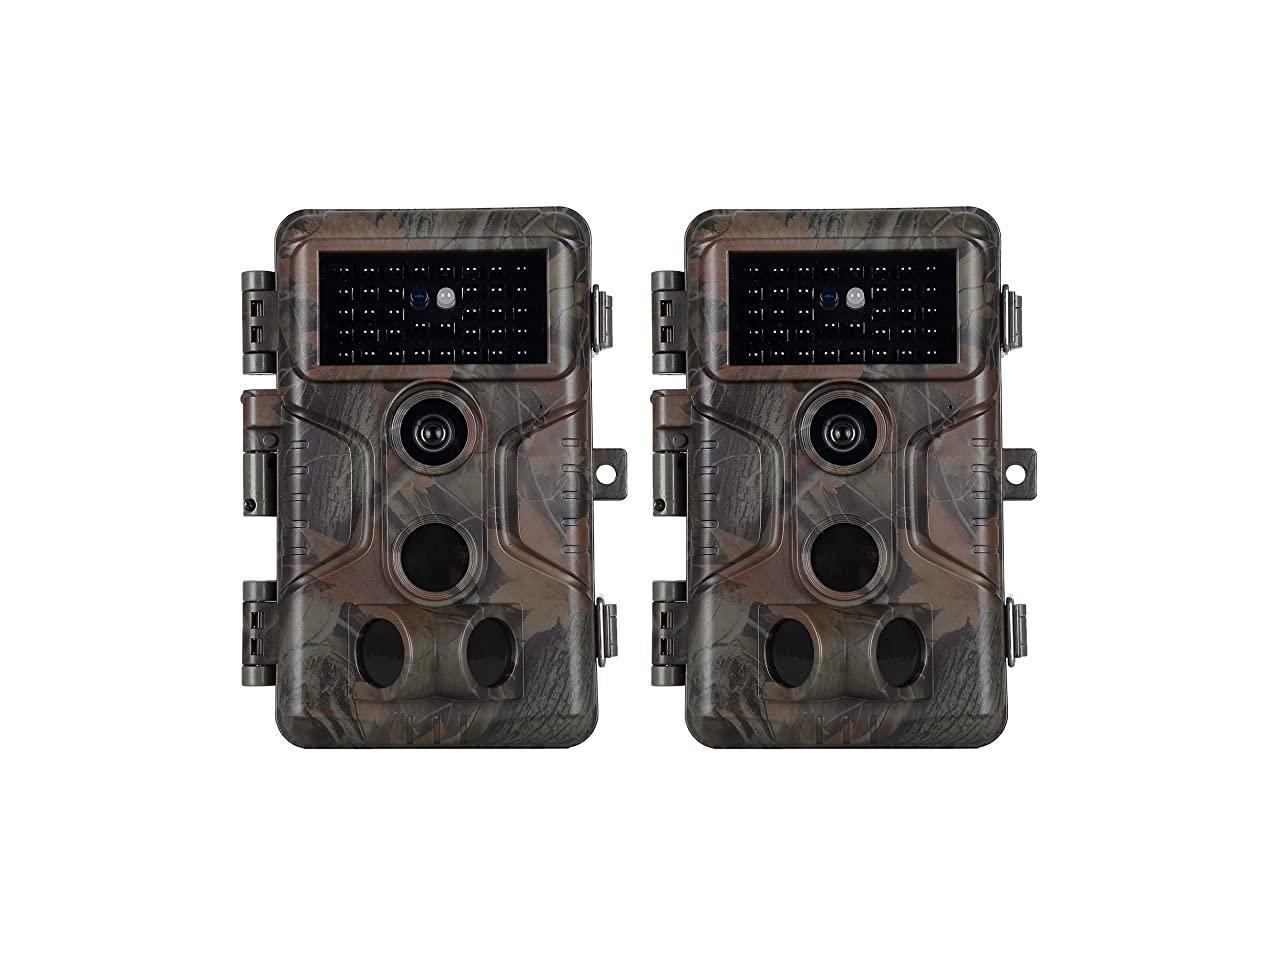 stapel Ophef Overleving No Glow Game Deer Trail Cameras 20MP 1080P H264 Video 100ft Night Vision  Motion Activated 01S Trigger Speed Waterproof Security Cameras for Home and  Outdoor Surveillance Wildlife Hunting - Newegg.com